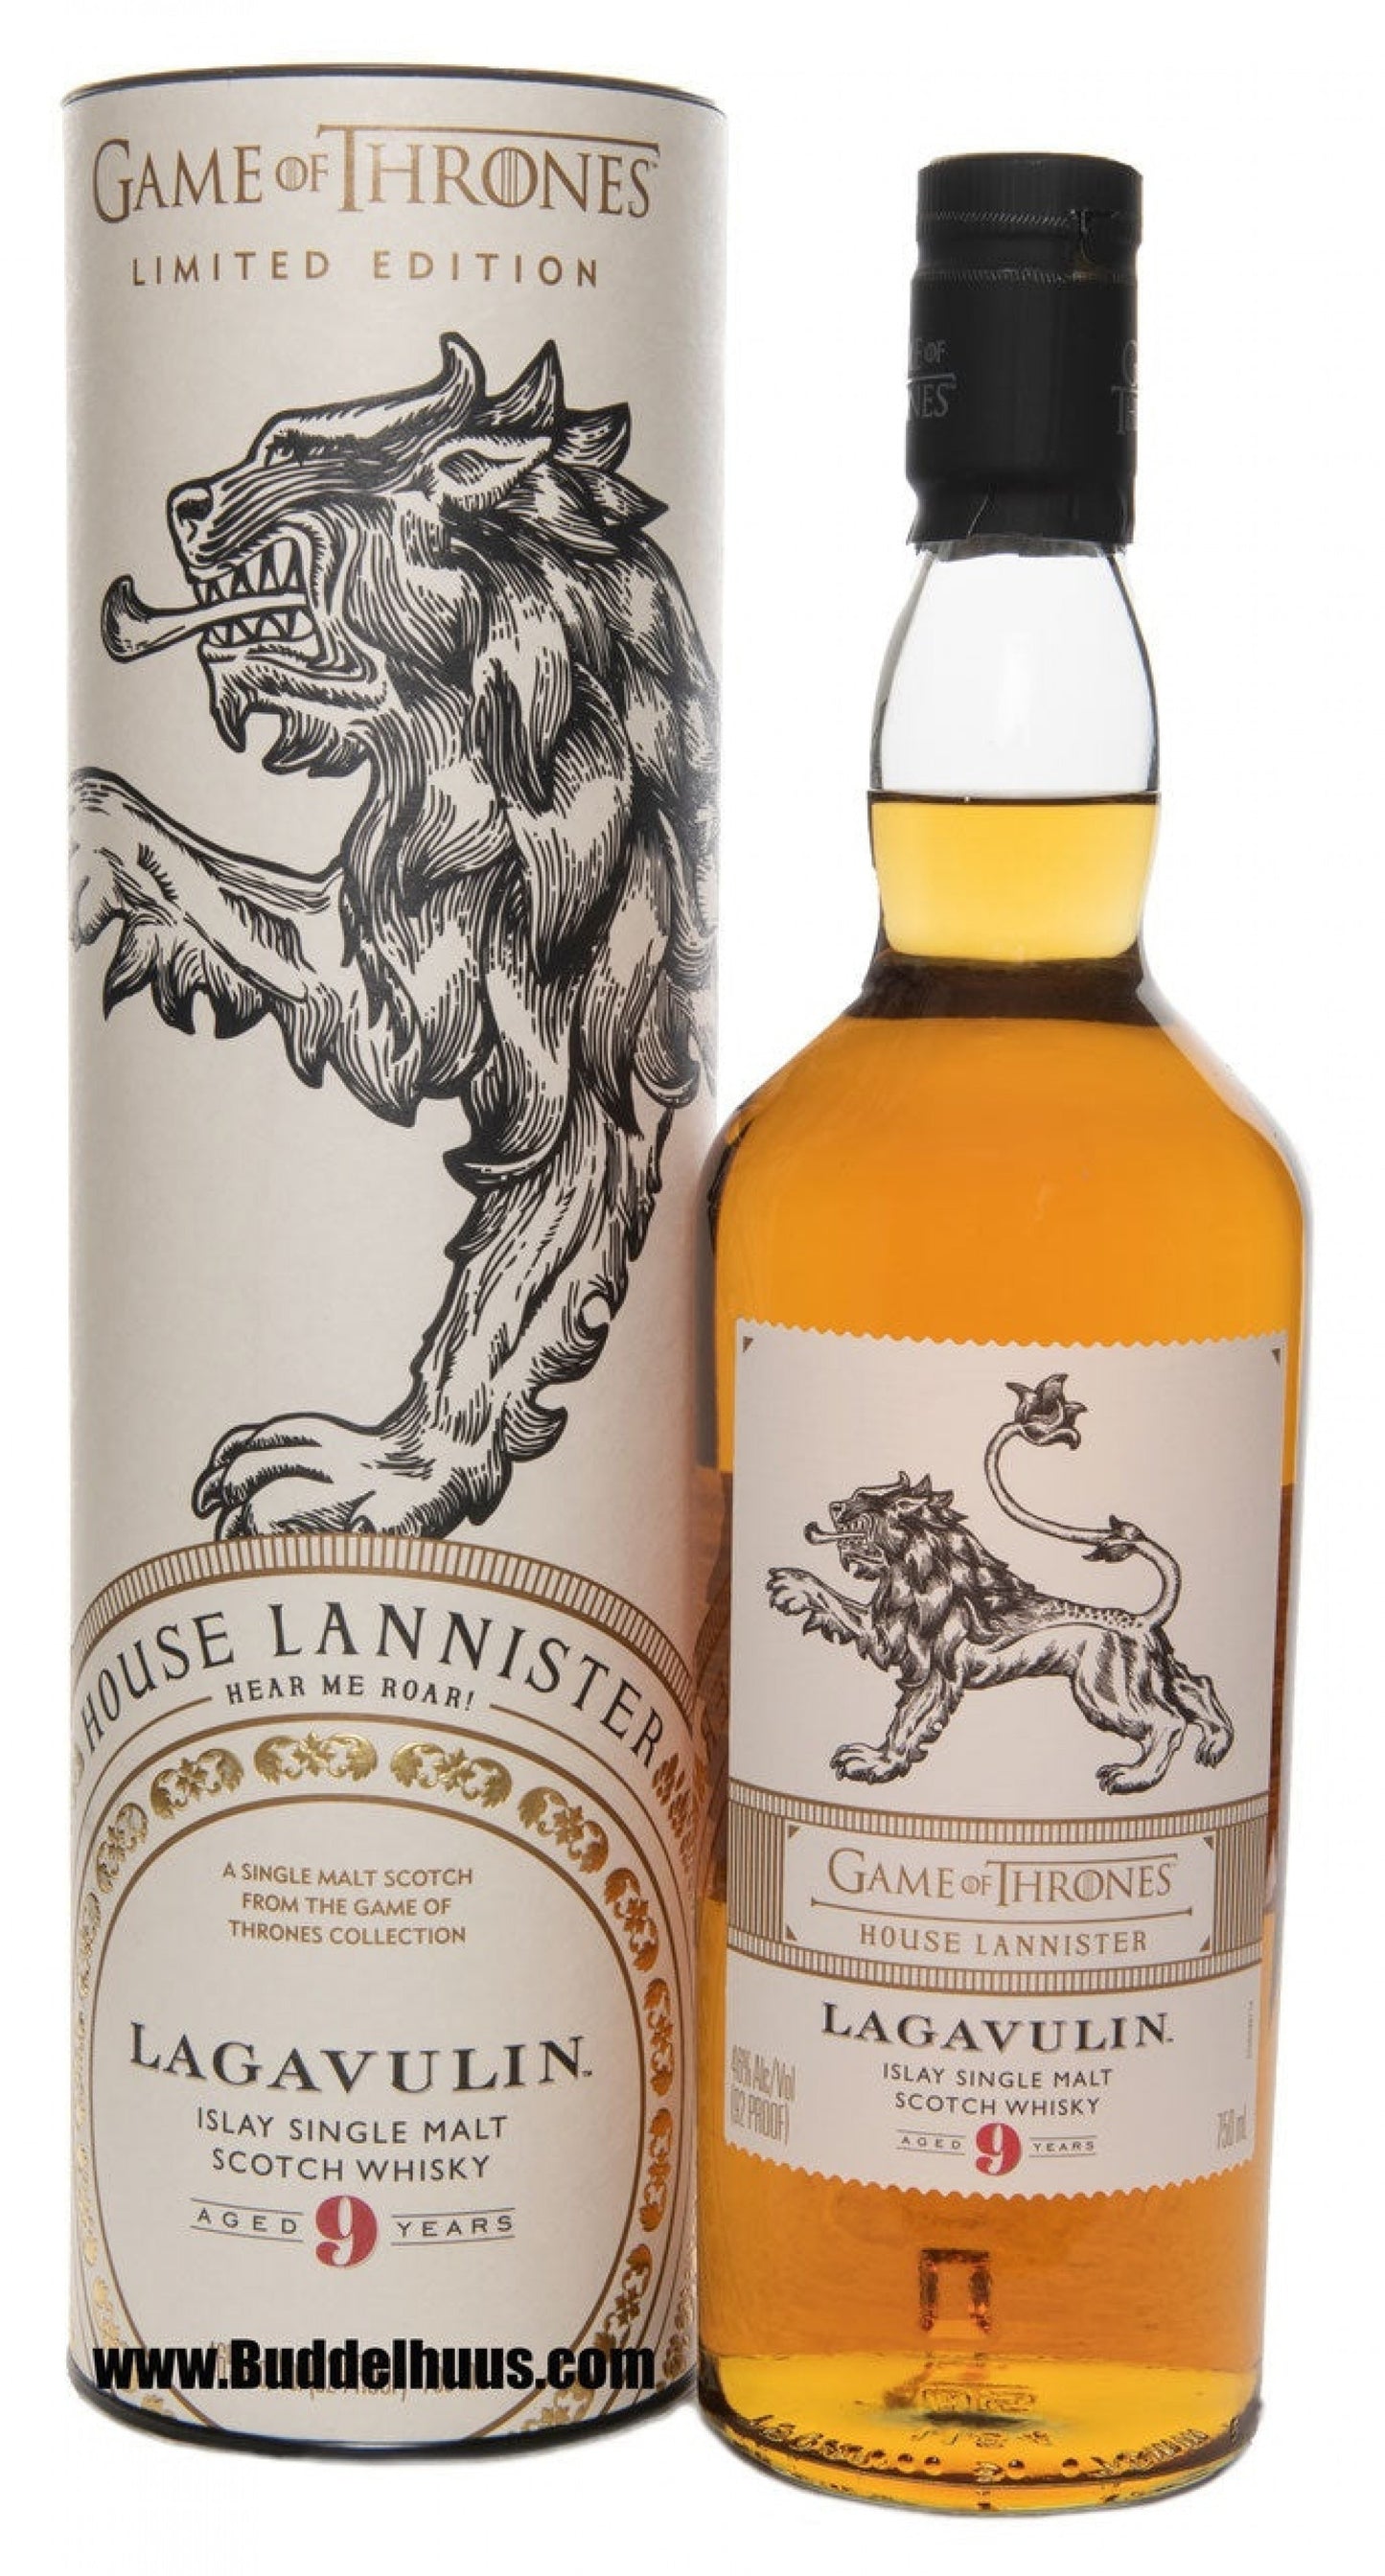 Game of Thrones Lagavulin 9 yo House Lannister